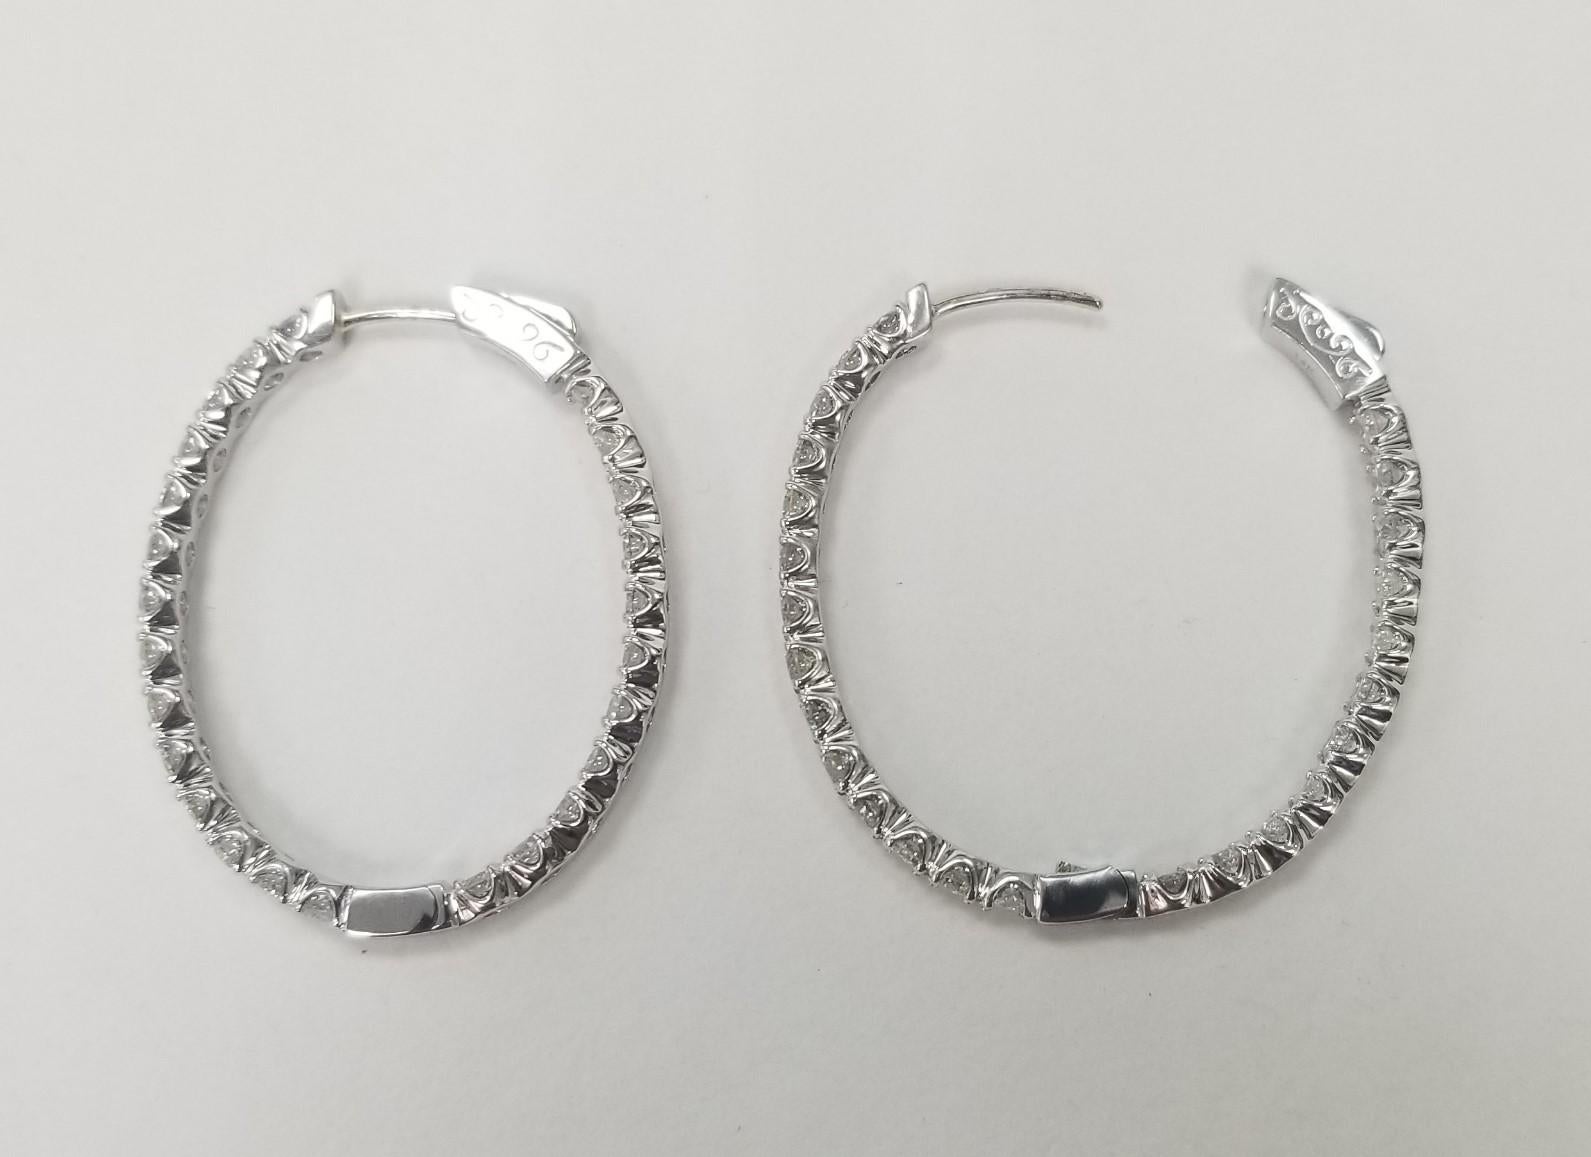 6.10 CARAT DIAMOND Oval HOOP EARRINGS IN 14K WHITE GOLD
*Motivated to Sell – Please make a Fair Offer*
Specifications:
    MAIN stone:  ROUND DIAMOND
    DIAMONDS: 50 PCS
    CARAT TOTAL WEIGHT: 6.10 CTW
    COLOR/clarity: F-G/VS2-SI1
    brand: